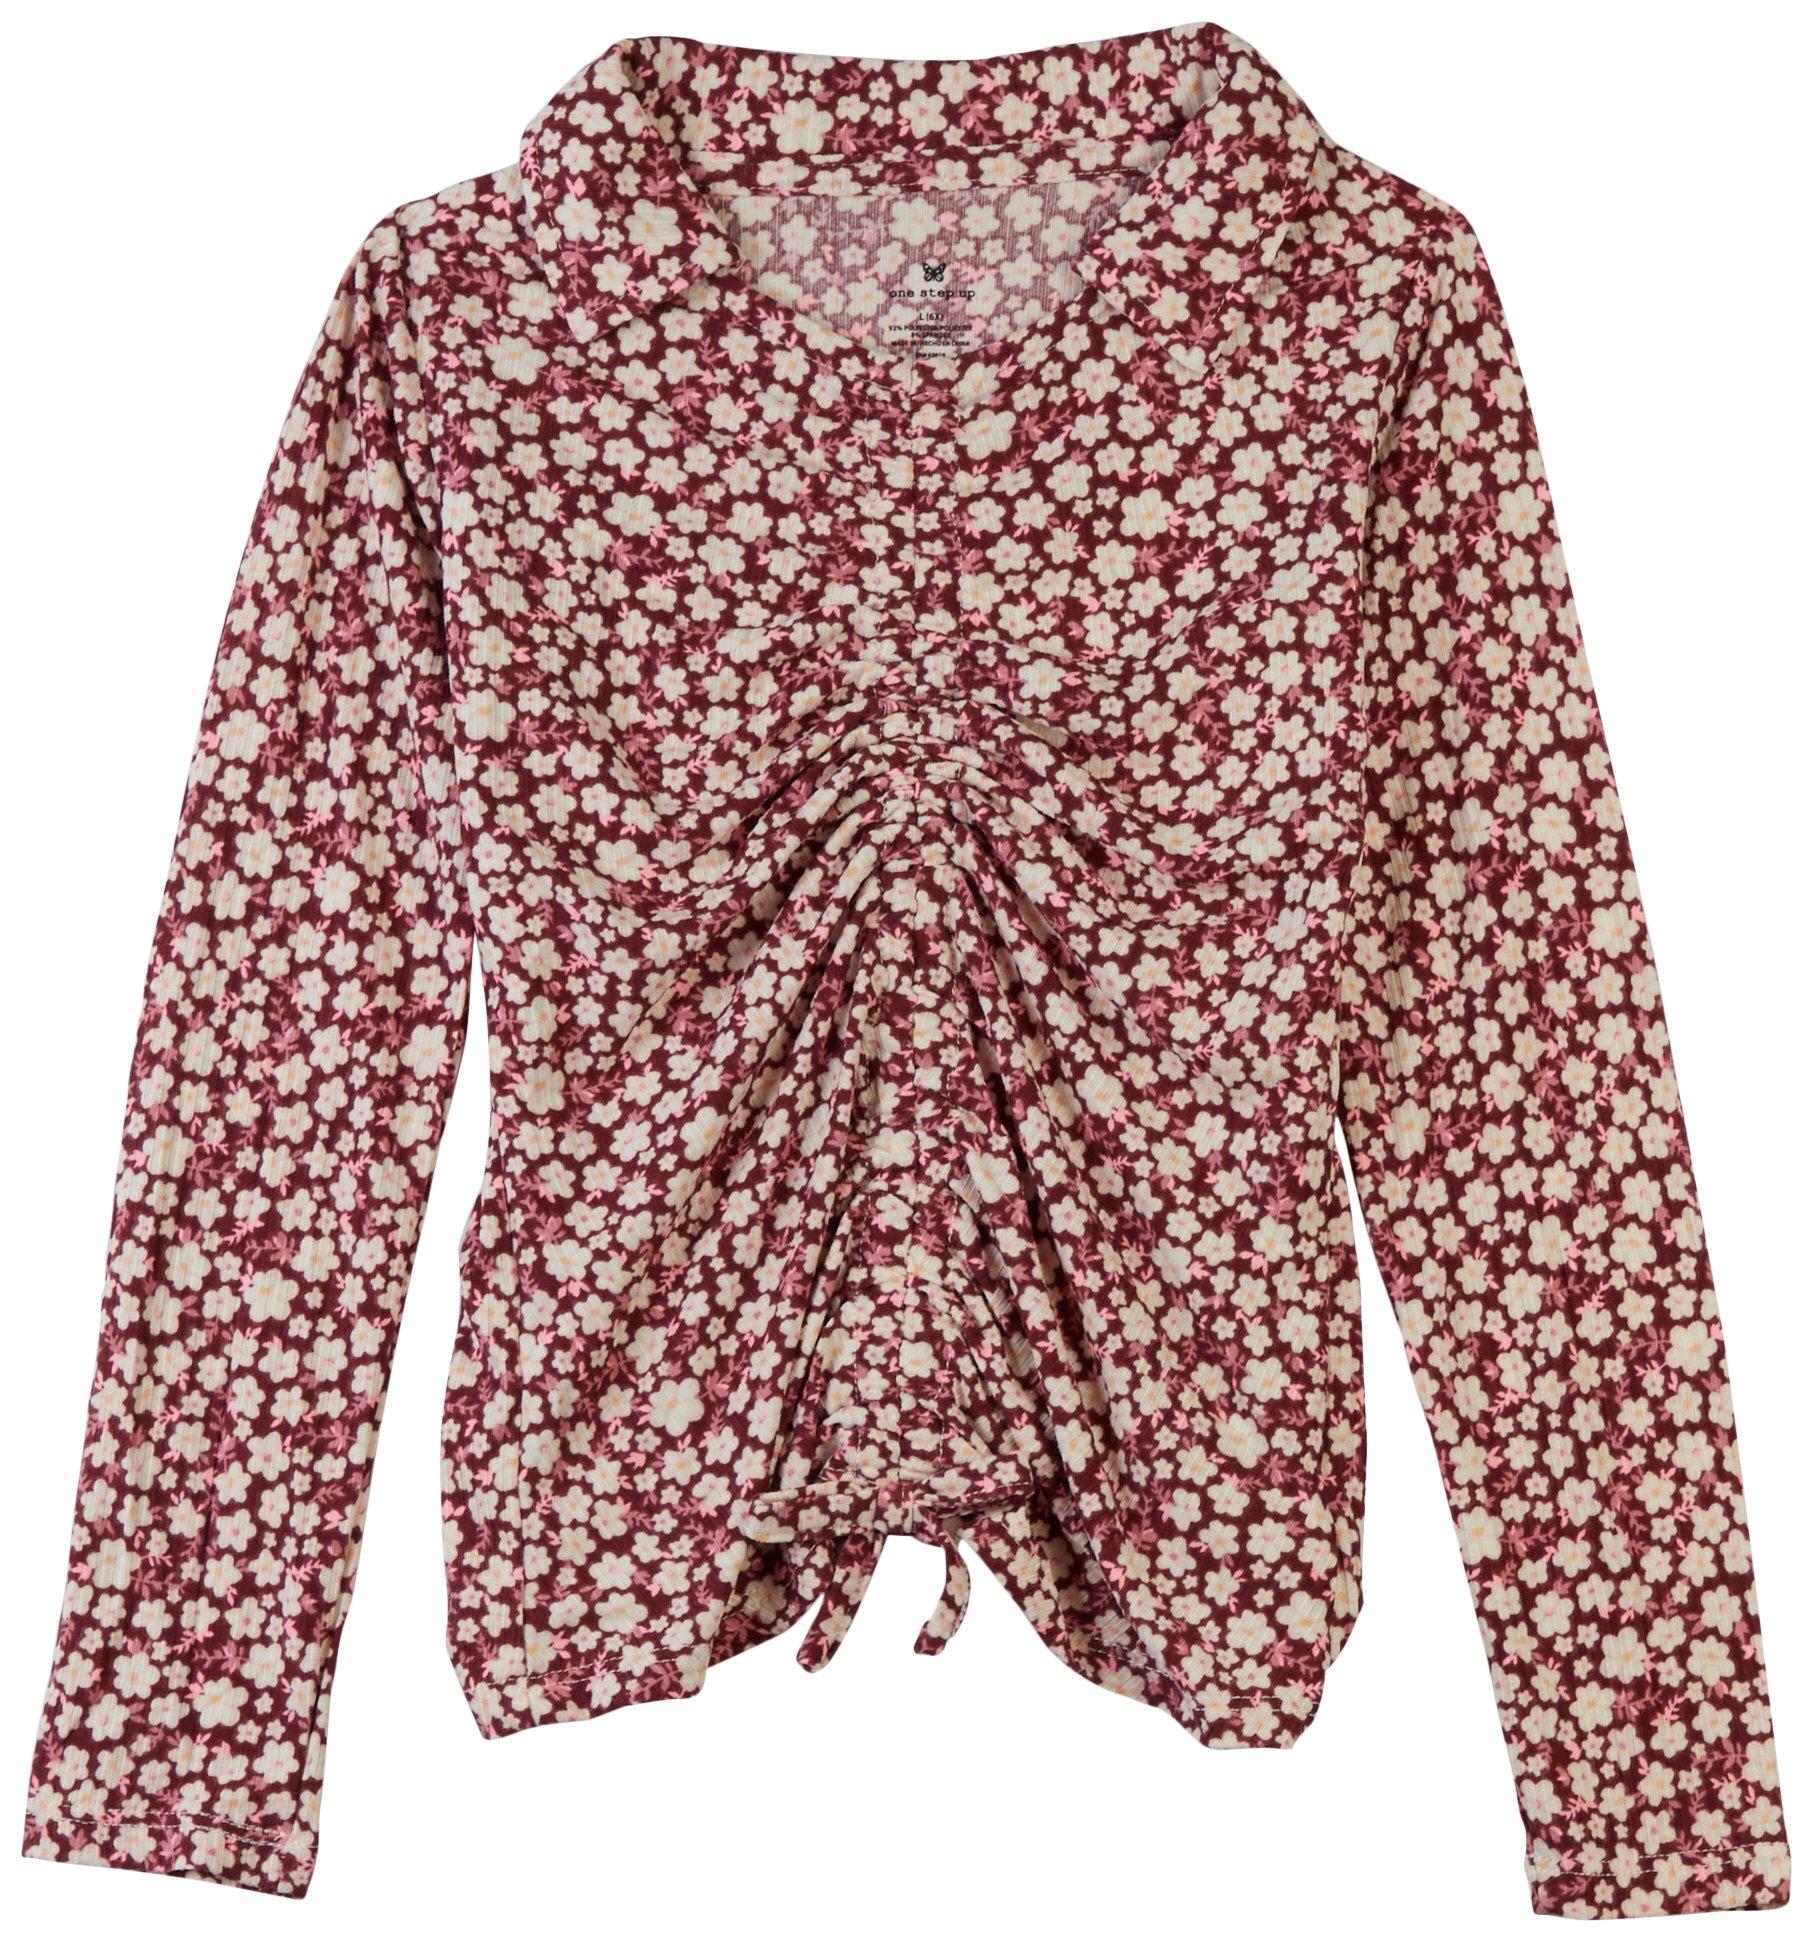 Little Girls Yummy Long Sleeve Floral Top